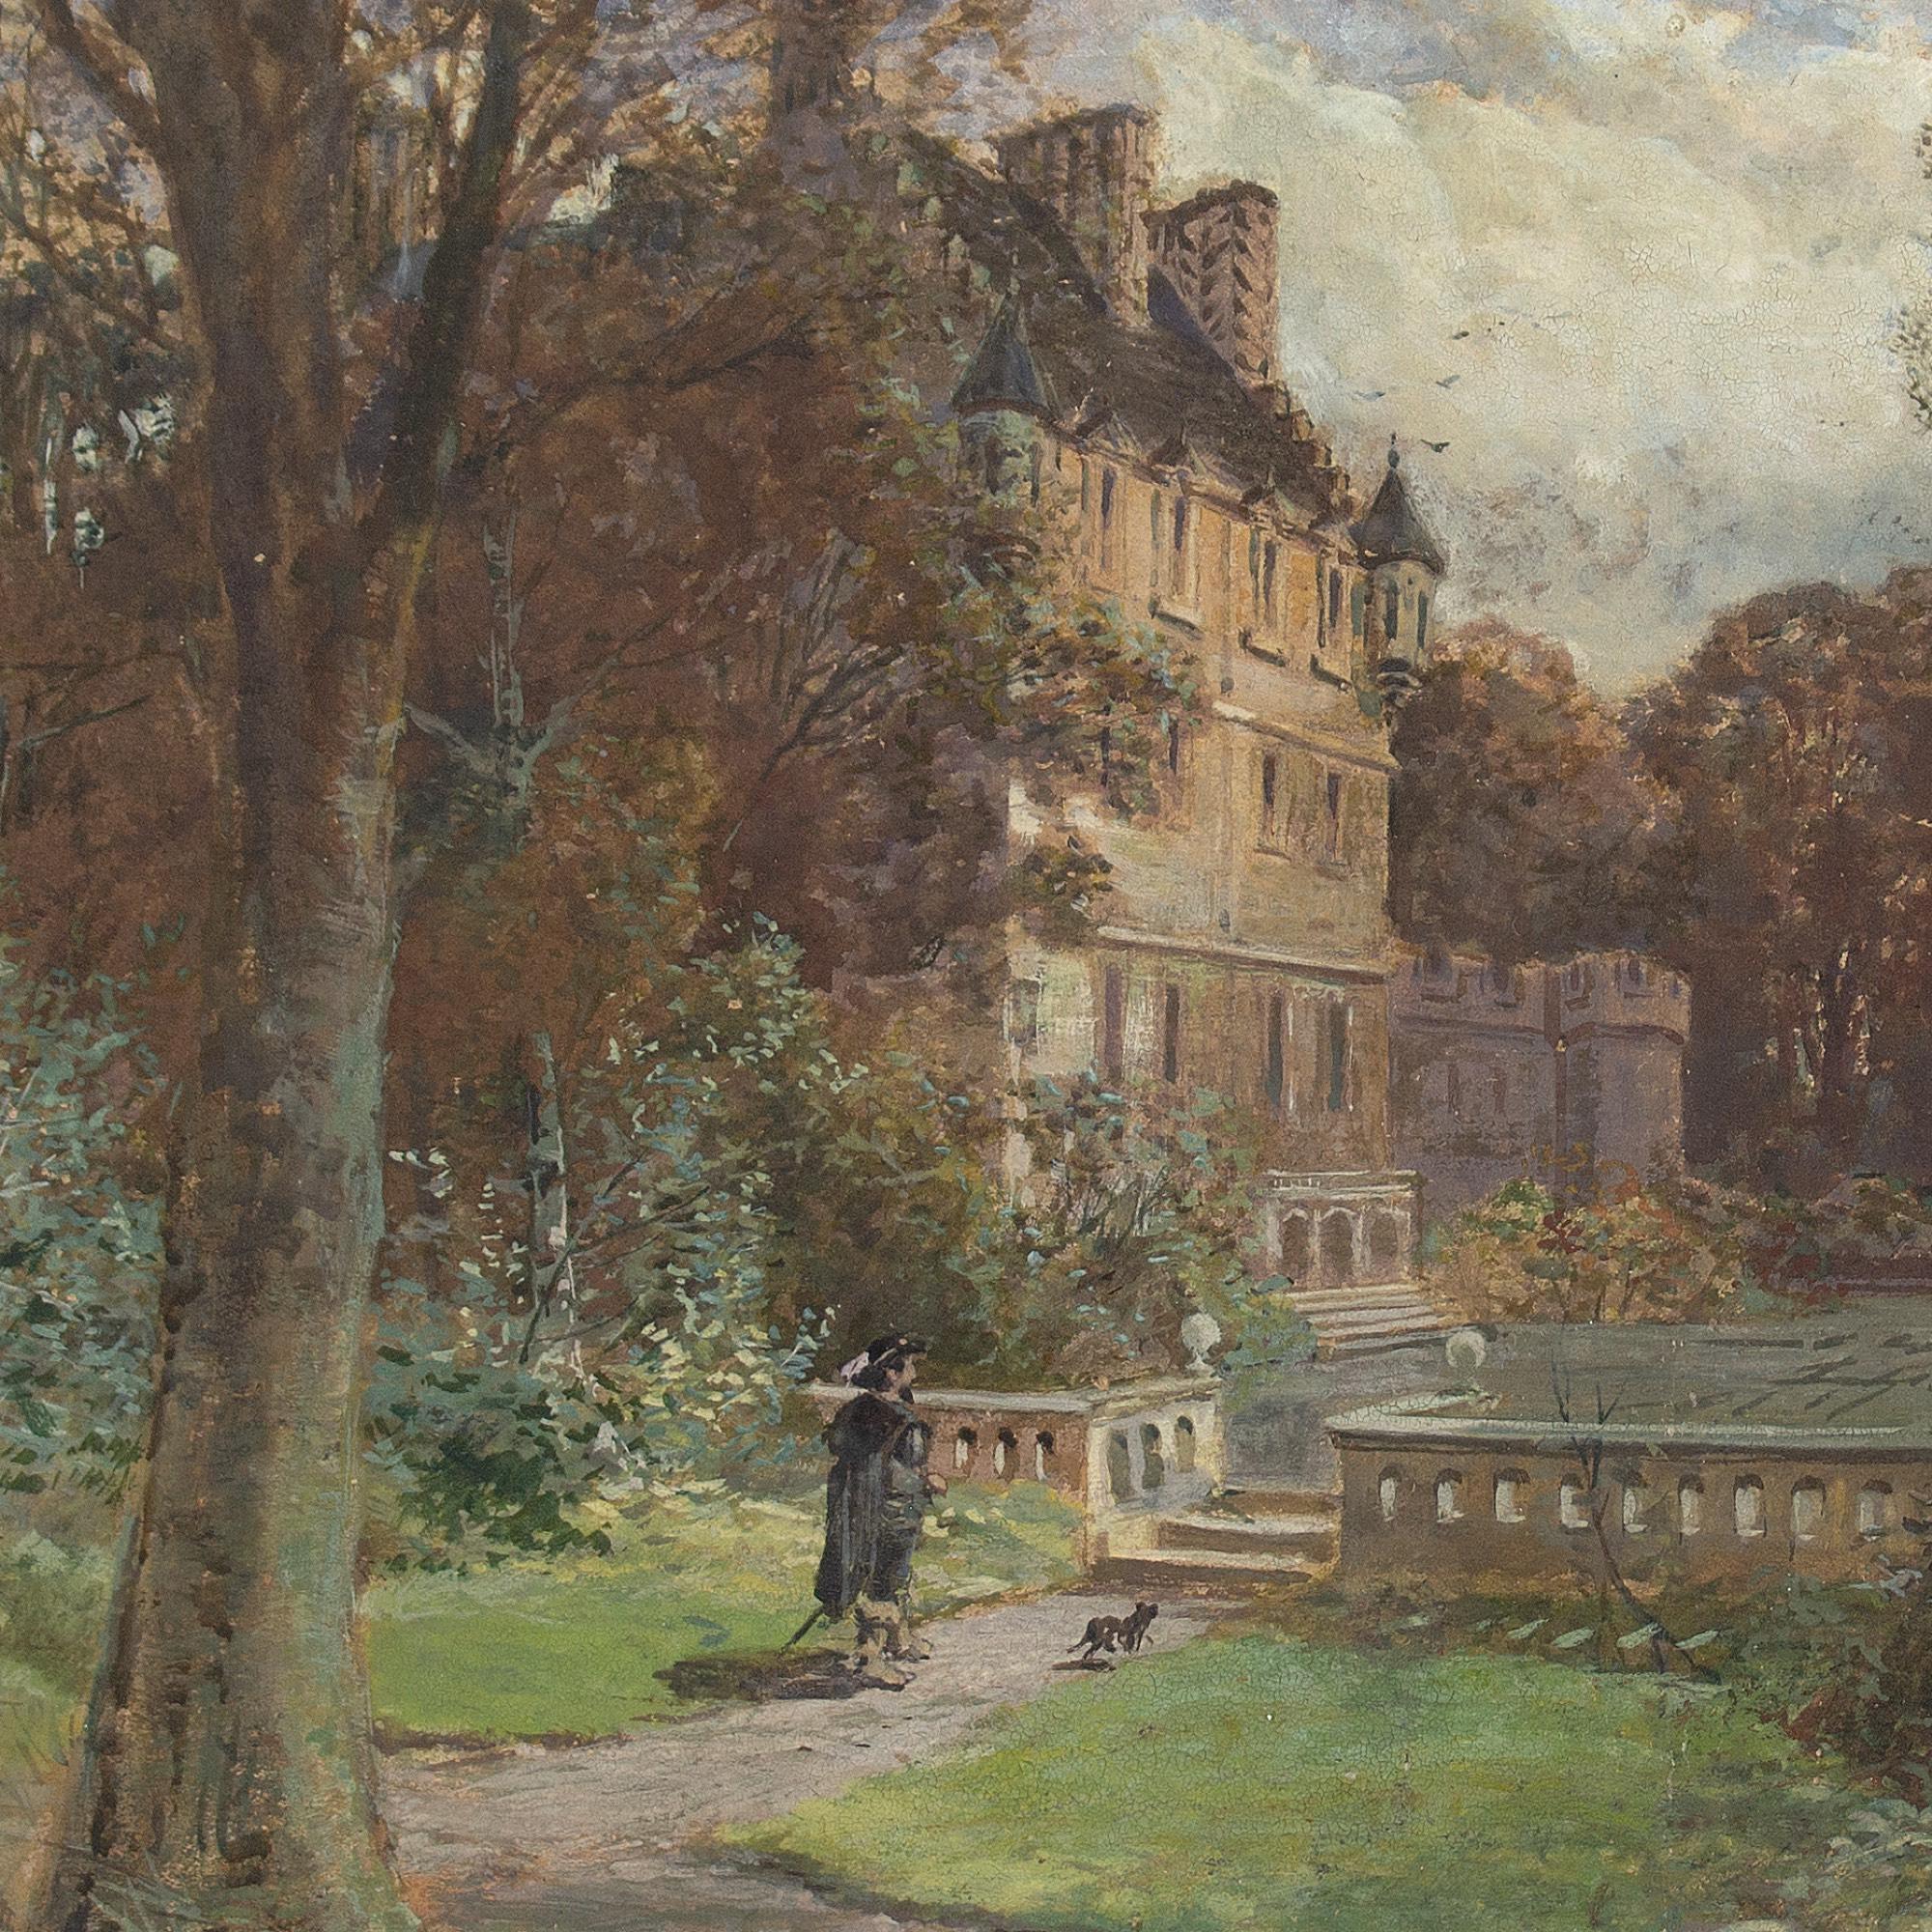 John Smart RSA RSW, The Grounds Of A Scottish Baronial Mansion, Watercolour 6